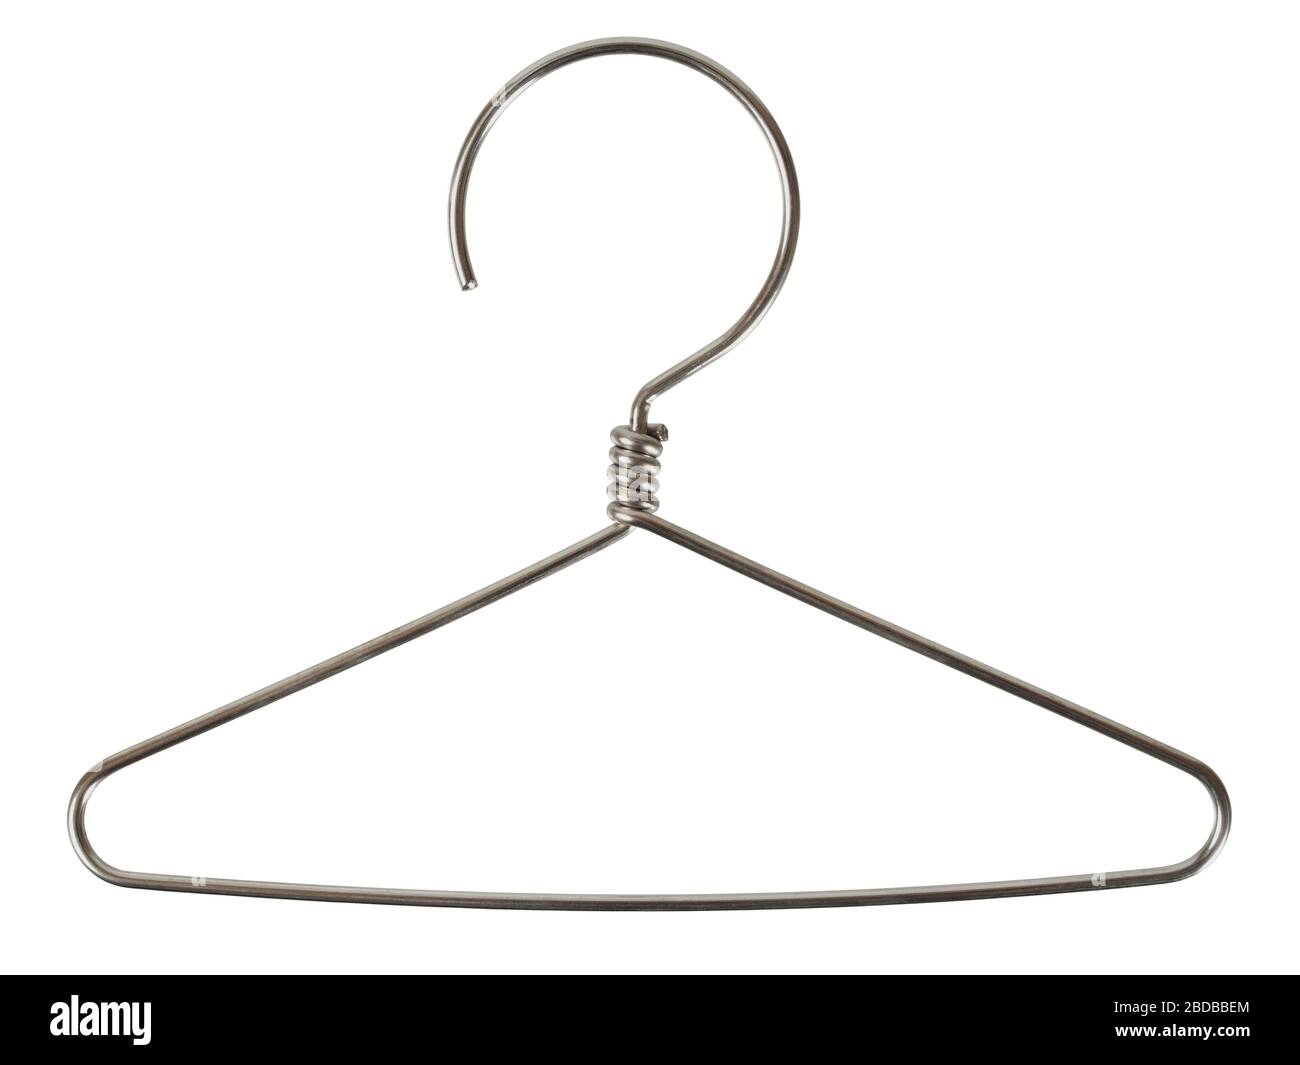 Wire coat hanger isolated on white background Stock Photo